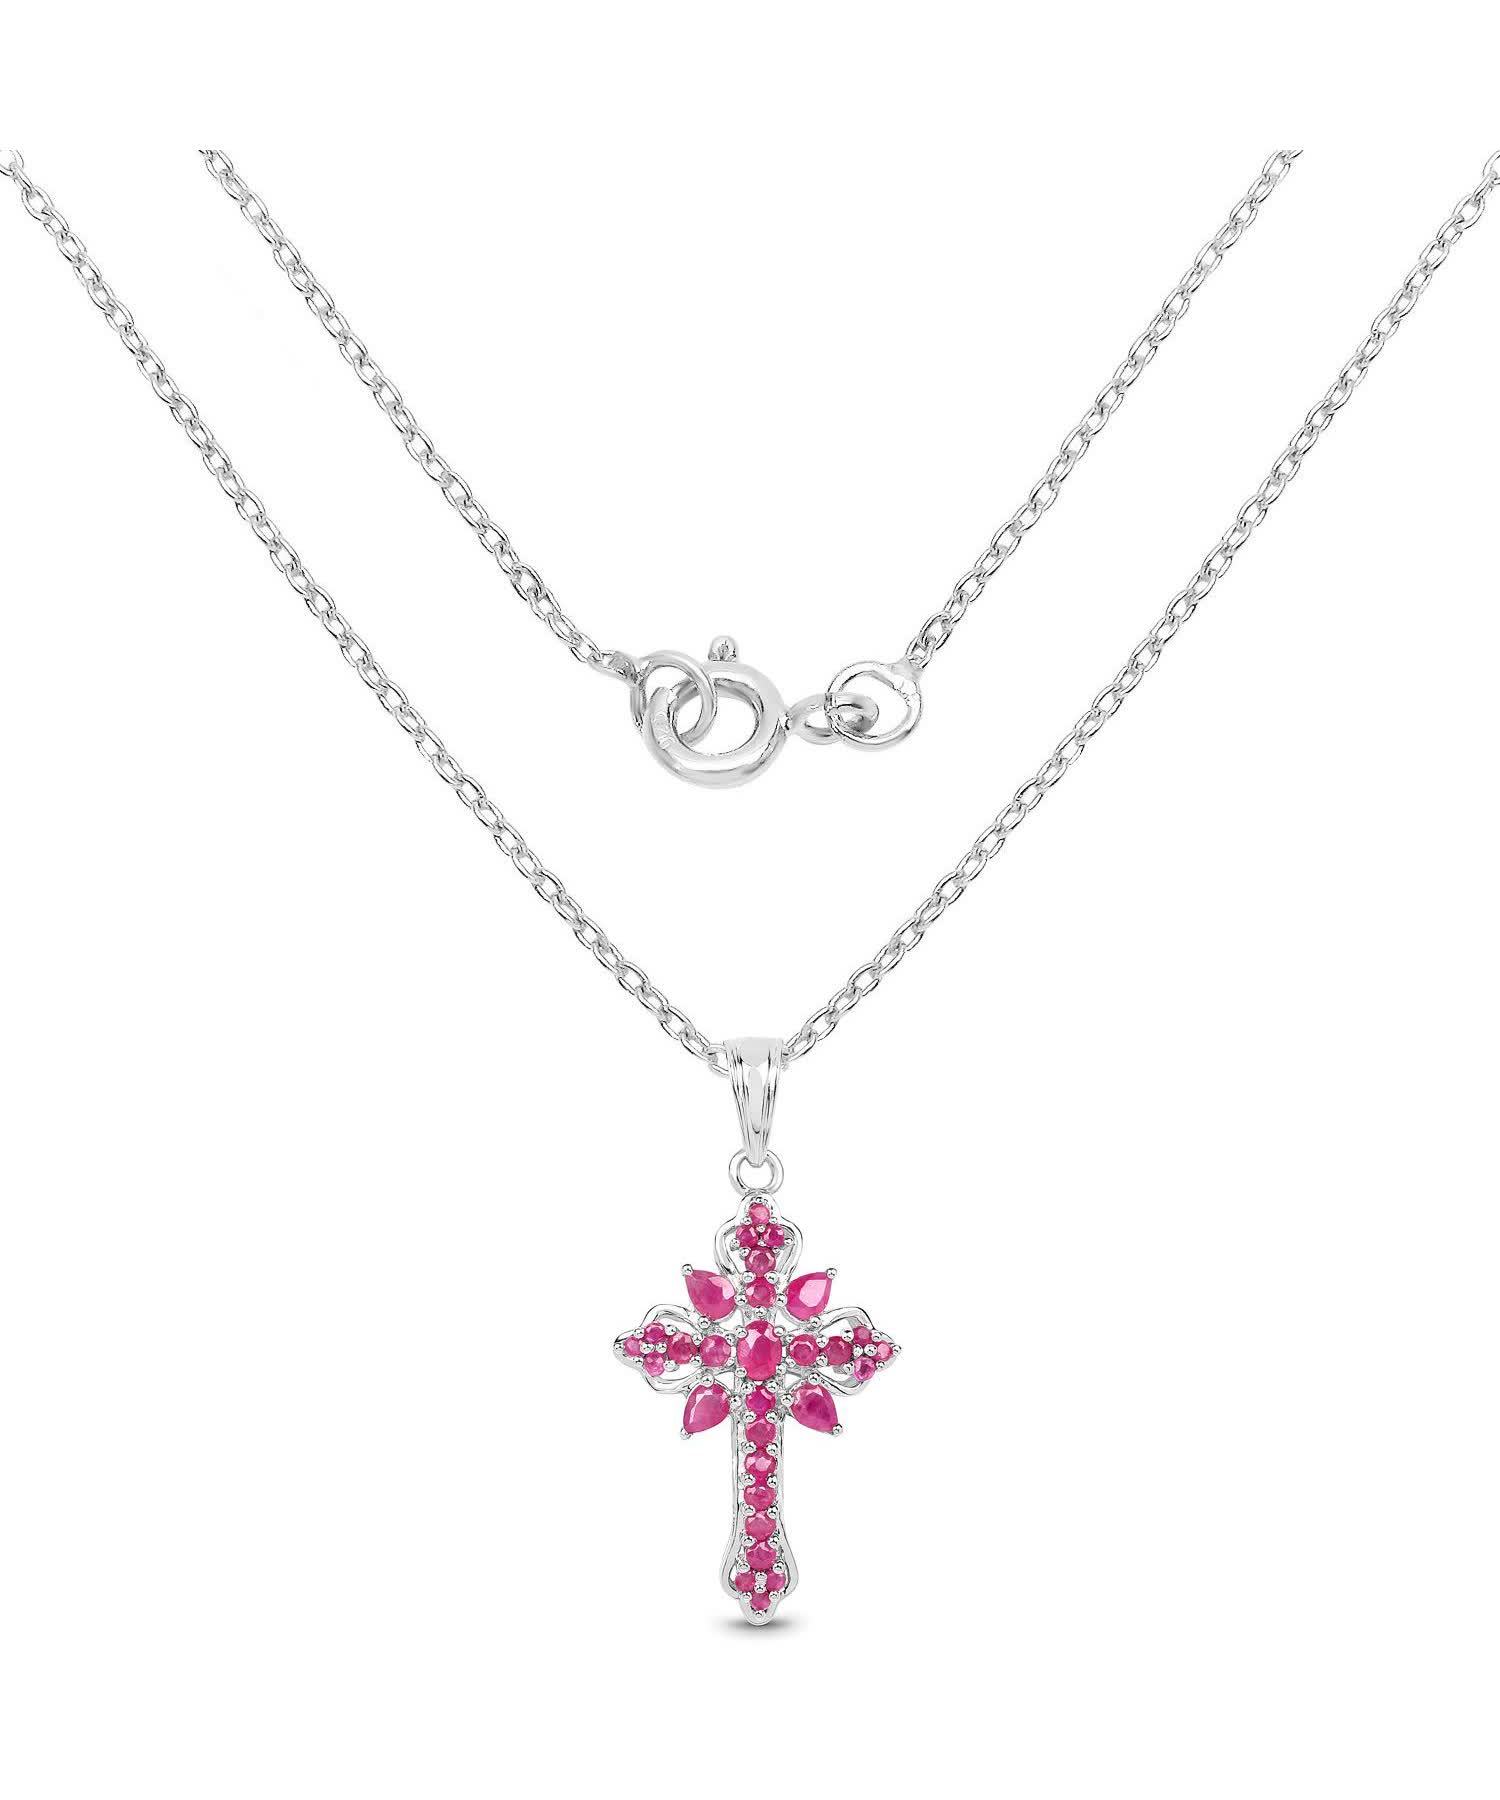 1.85ctw Natural Raspberry Ruby Rhodium Plated 925 Sterling Silver Cross Pendant With Chain View 2